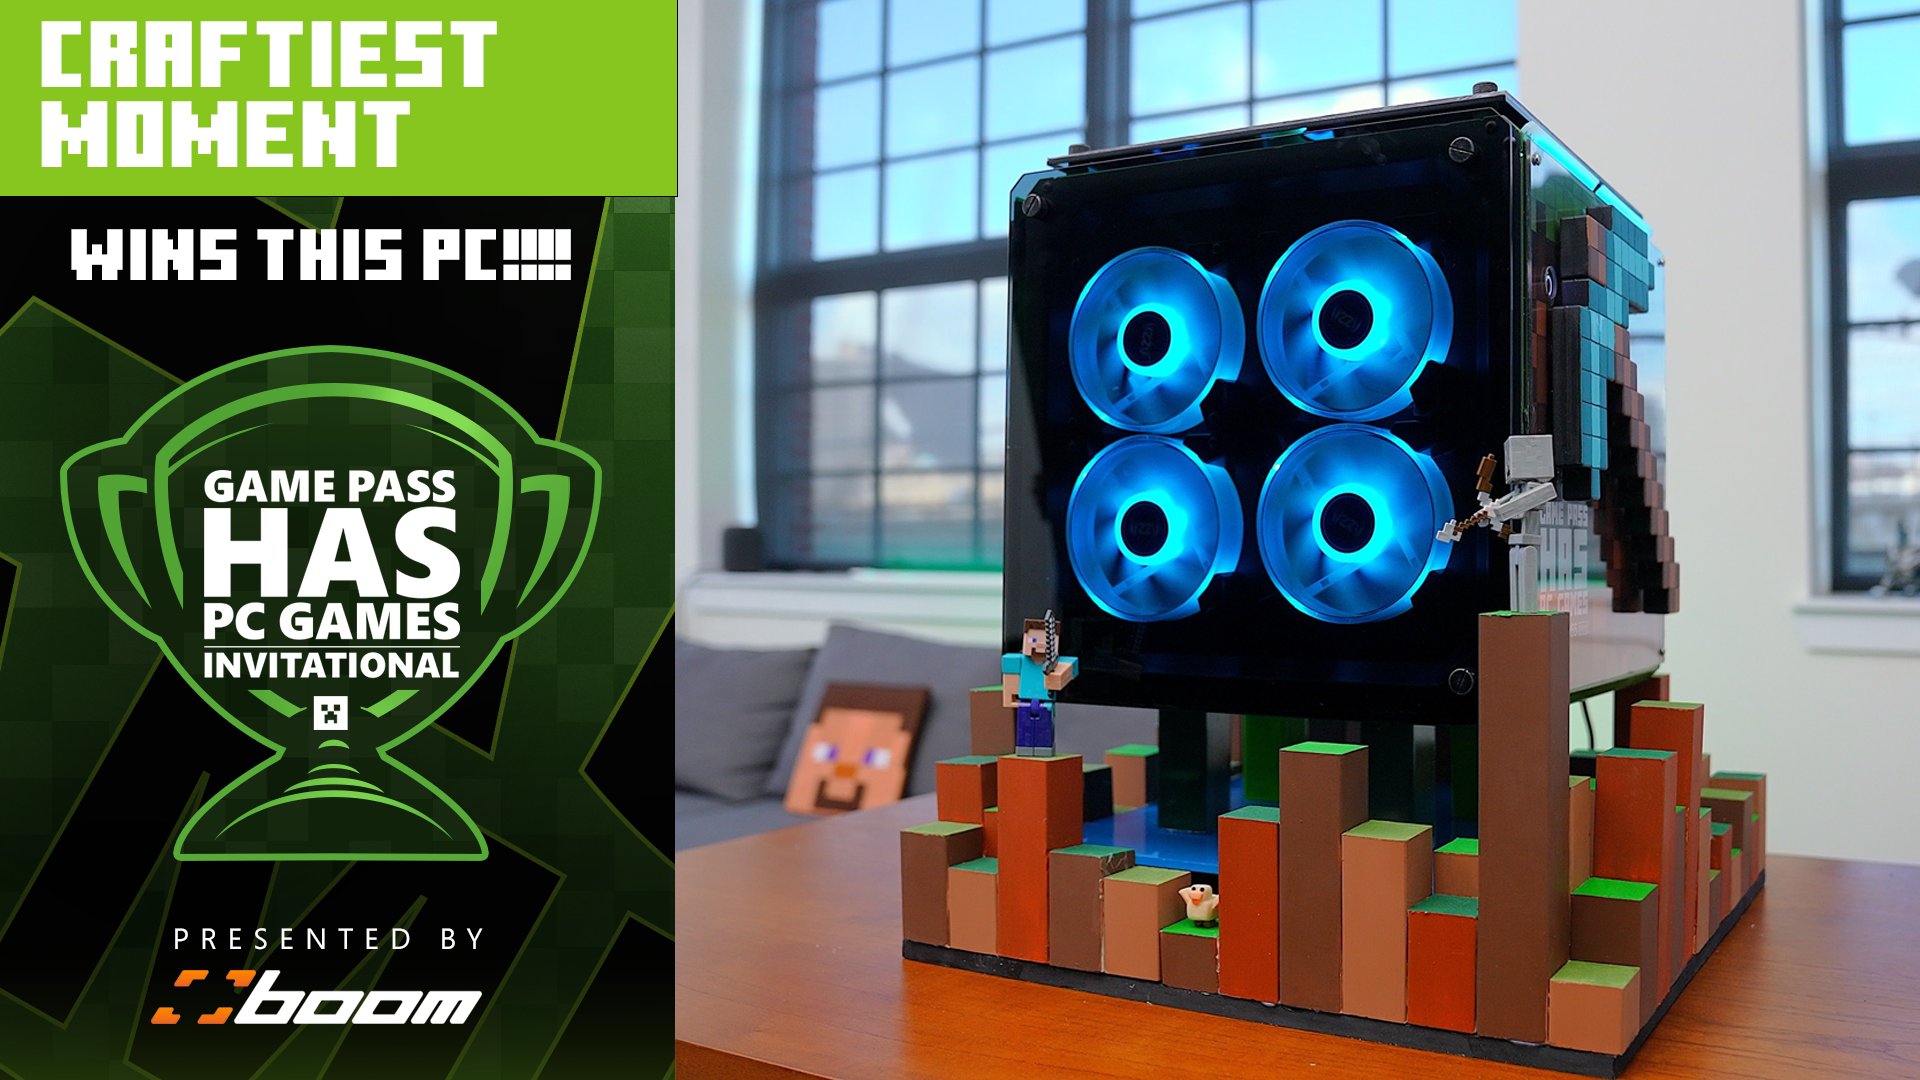 Who Should Win This SICK Minecraft PC?!